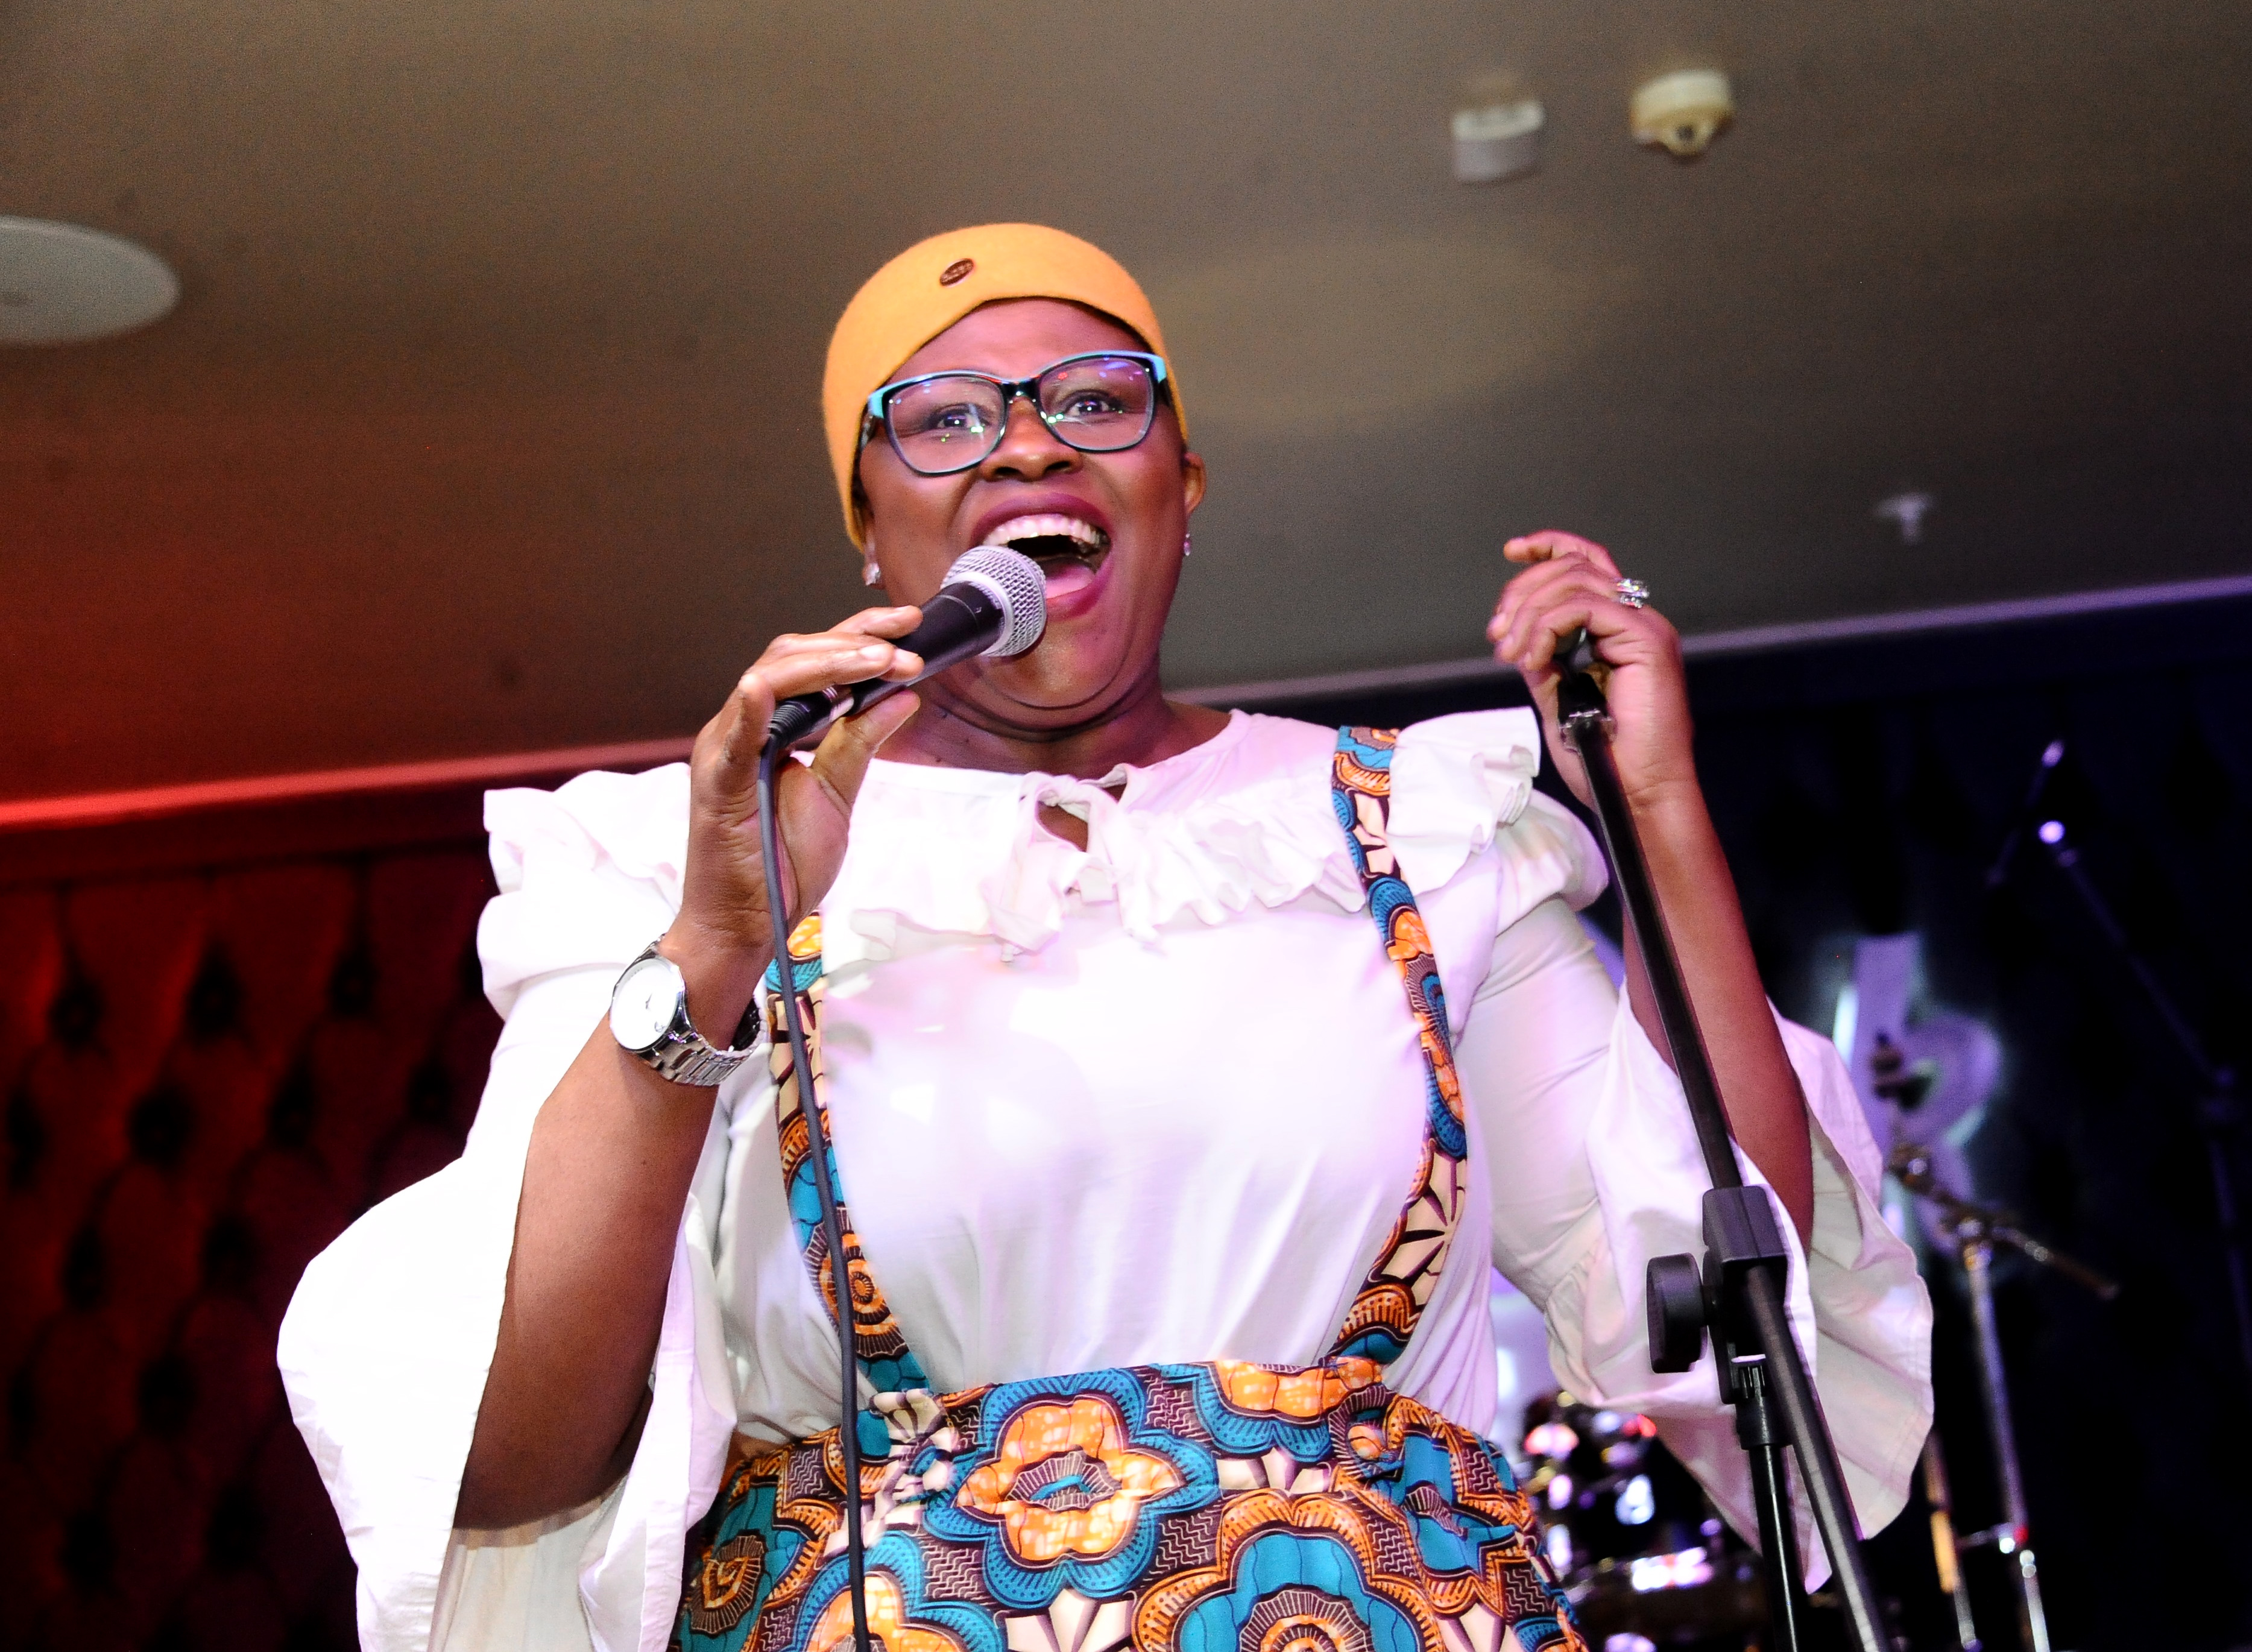 SANDTON, SOUTH AFRICA - AUGUST 10: Gloria Bosman during the Wine, Women & Jazz Experience at Hard Rock Cafe, Nelson Mandela Square on August 10, 2019 in Sandton, South Africa. The annual event organized by 4ever Jazz in its 3rd year, is a celebration of women and jazz during Women's Month. (Photo by Gallo Images/Oupa Bopape)